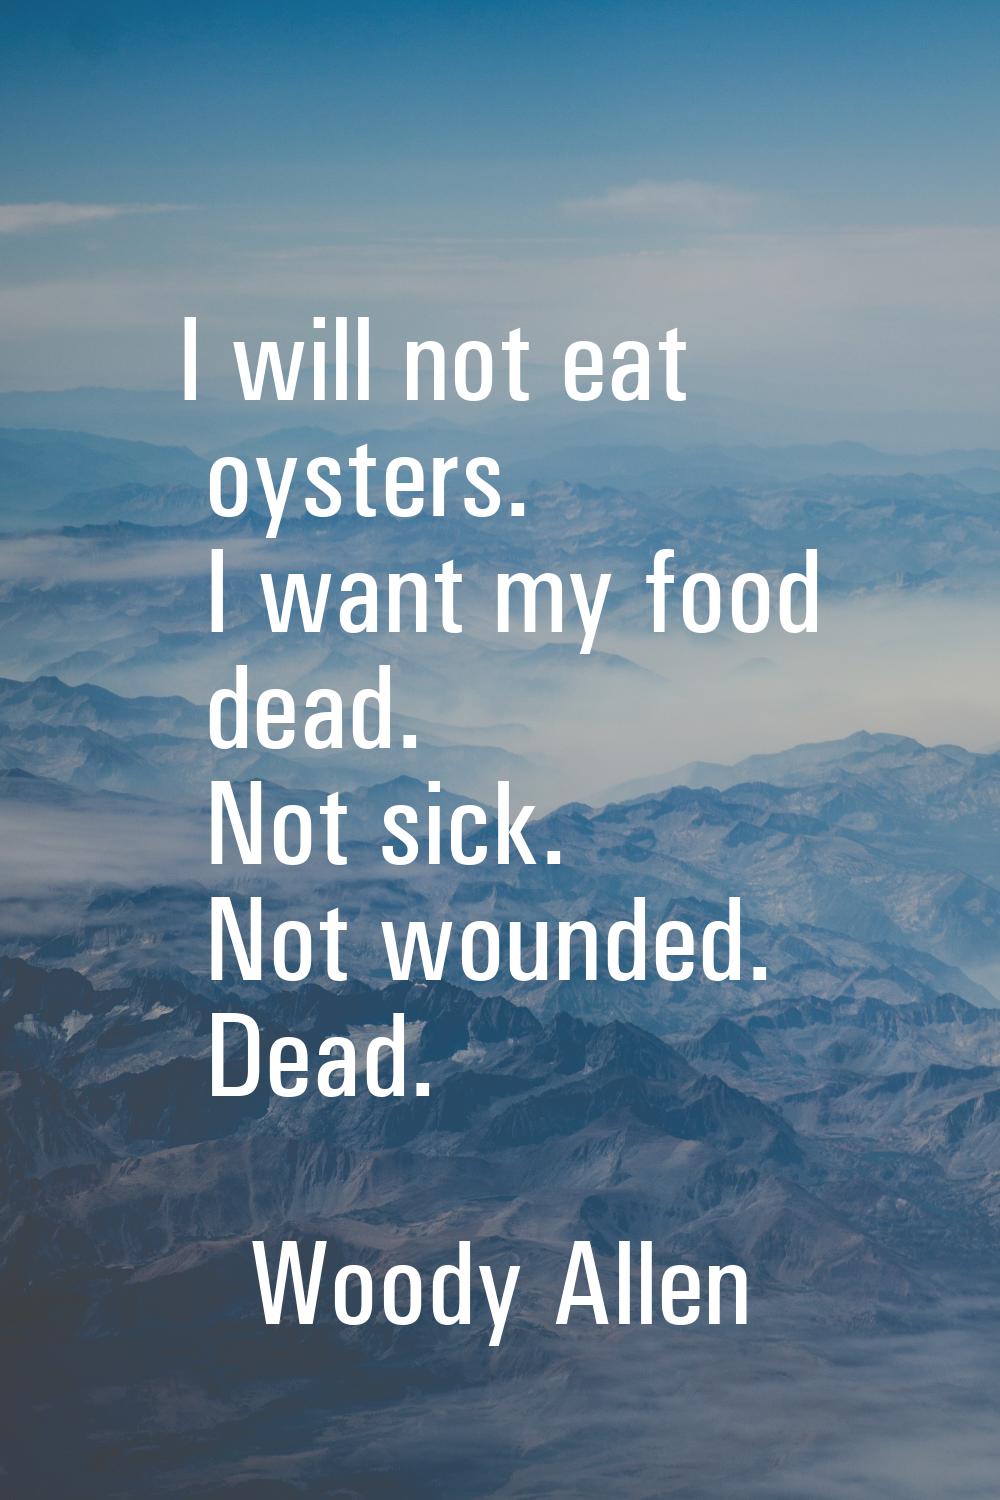 I will not eat oysters. I want my food dead. Not sick. Not wounded. Dead.